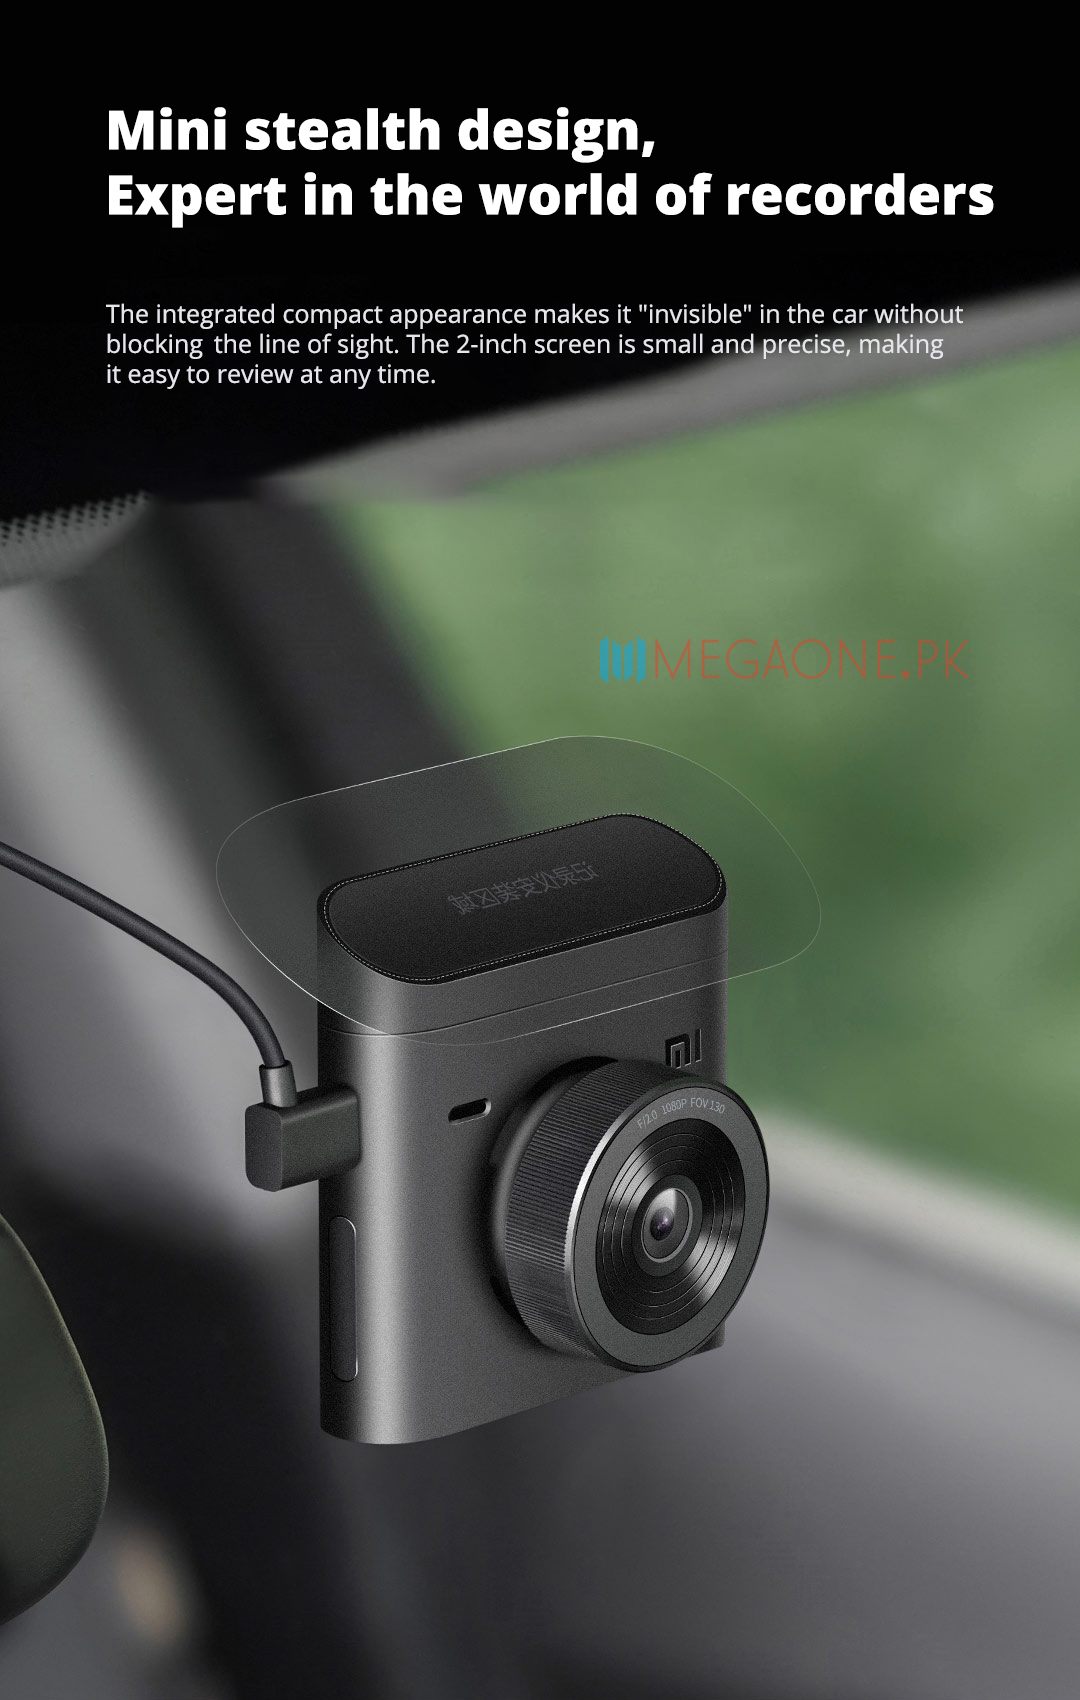 The integrated compact appearance makes it "invisible" in the car without blocking the line of sight. The 2-inch screen is small and precise, making it easy to review at any time.